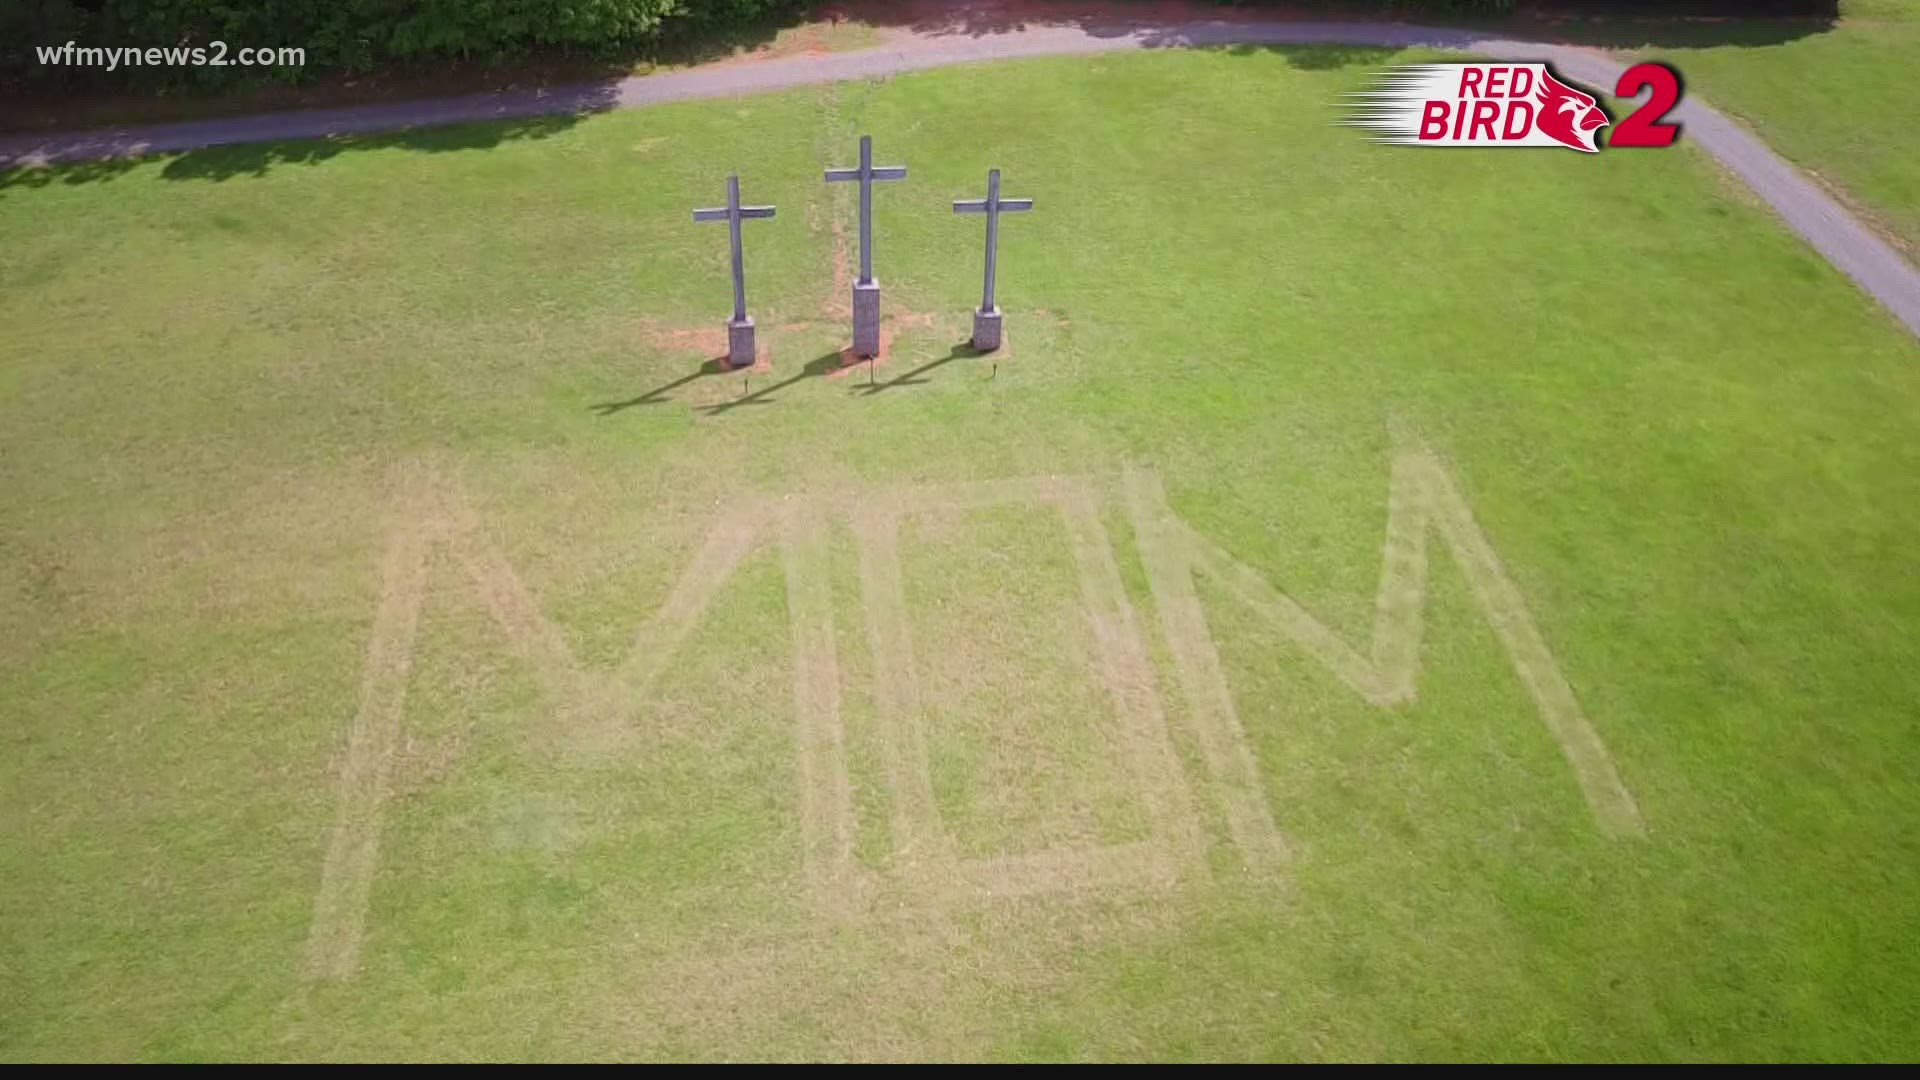 If you get a bird's eye view of Gilmore Memorial Park in Julian, you'll see the grass sends a special message to mothers.